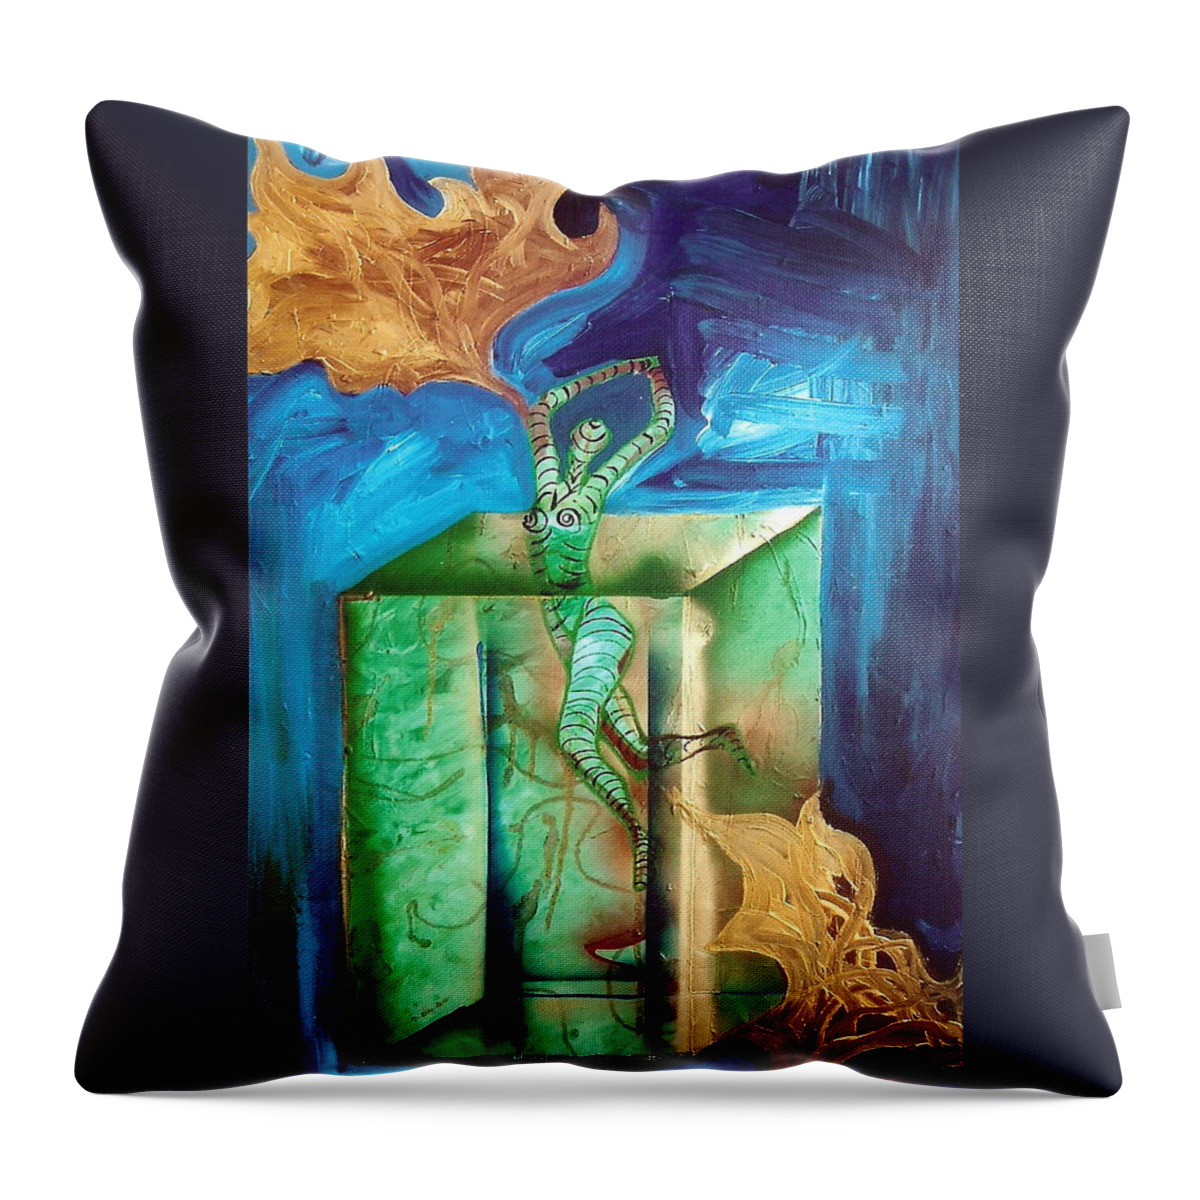  Throw Pillow featuring the painting Exiting the Box by Lorena Fernandez